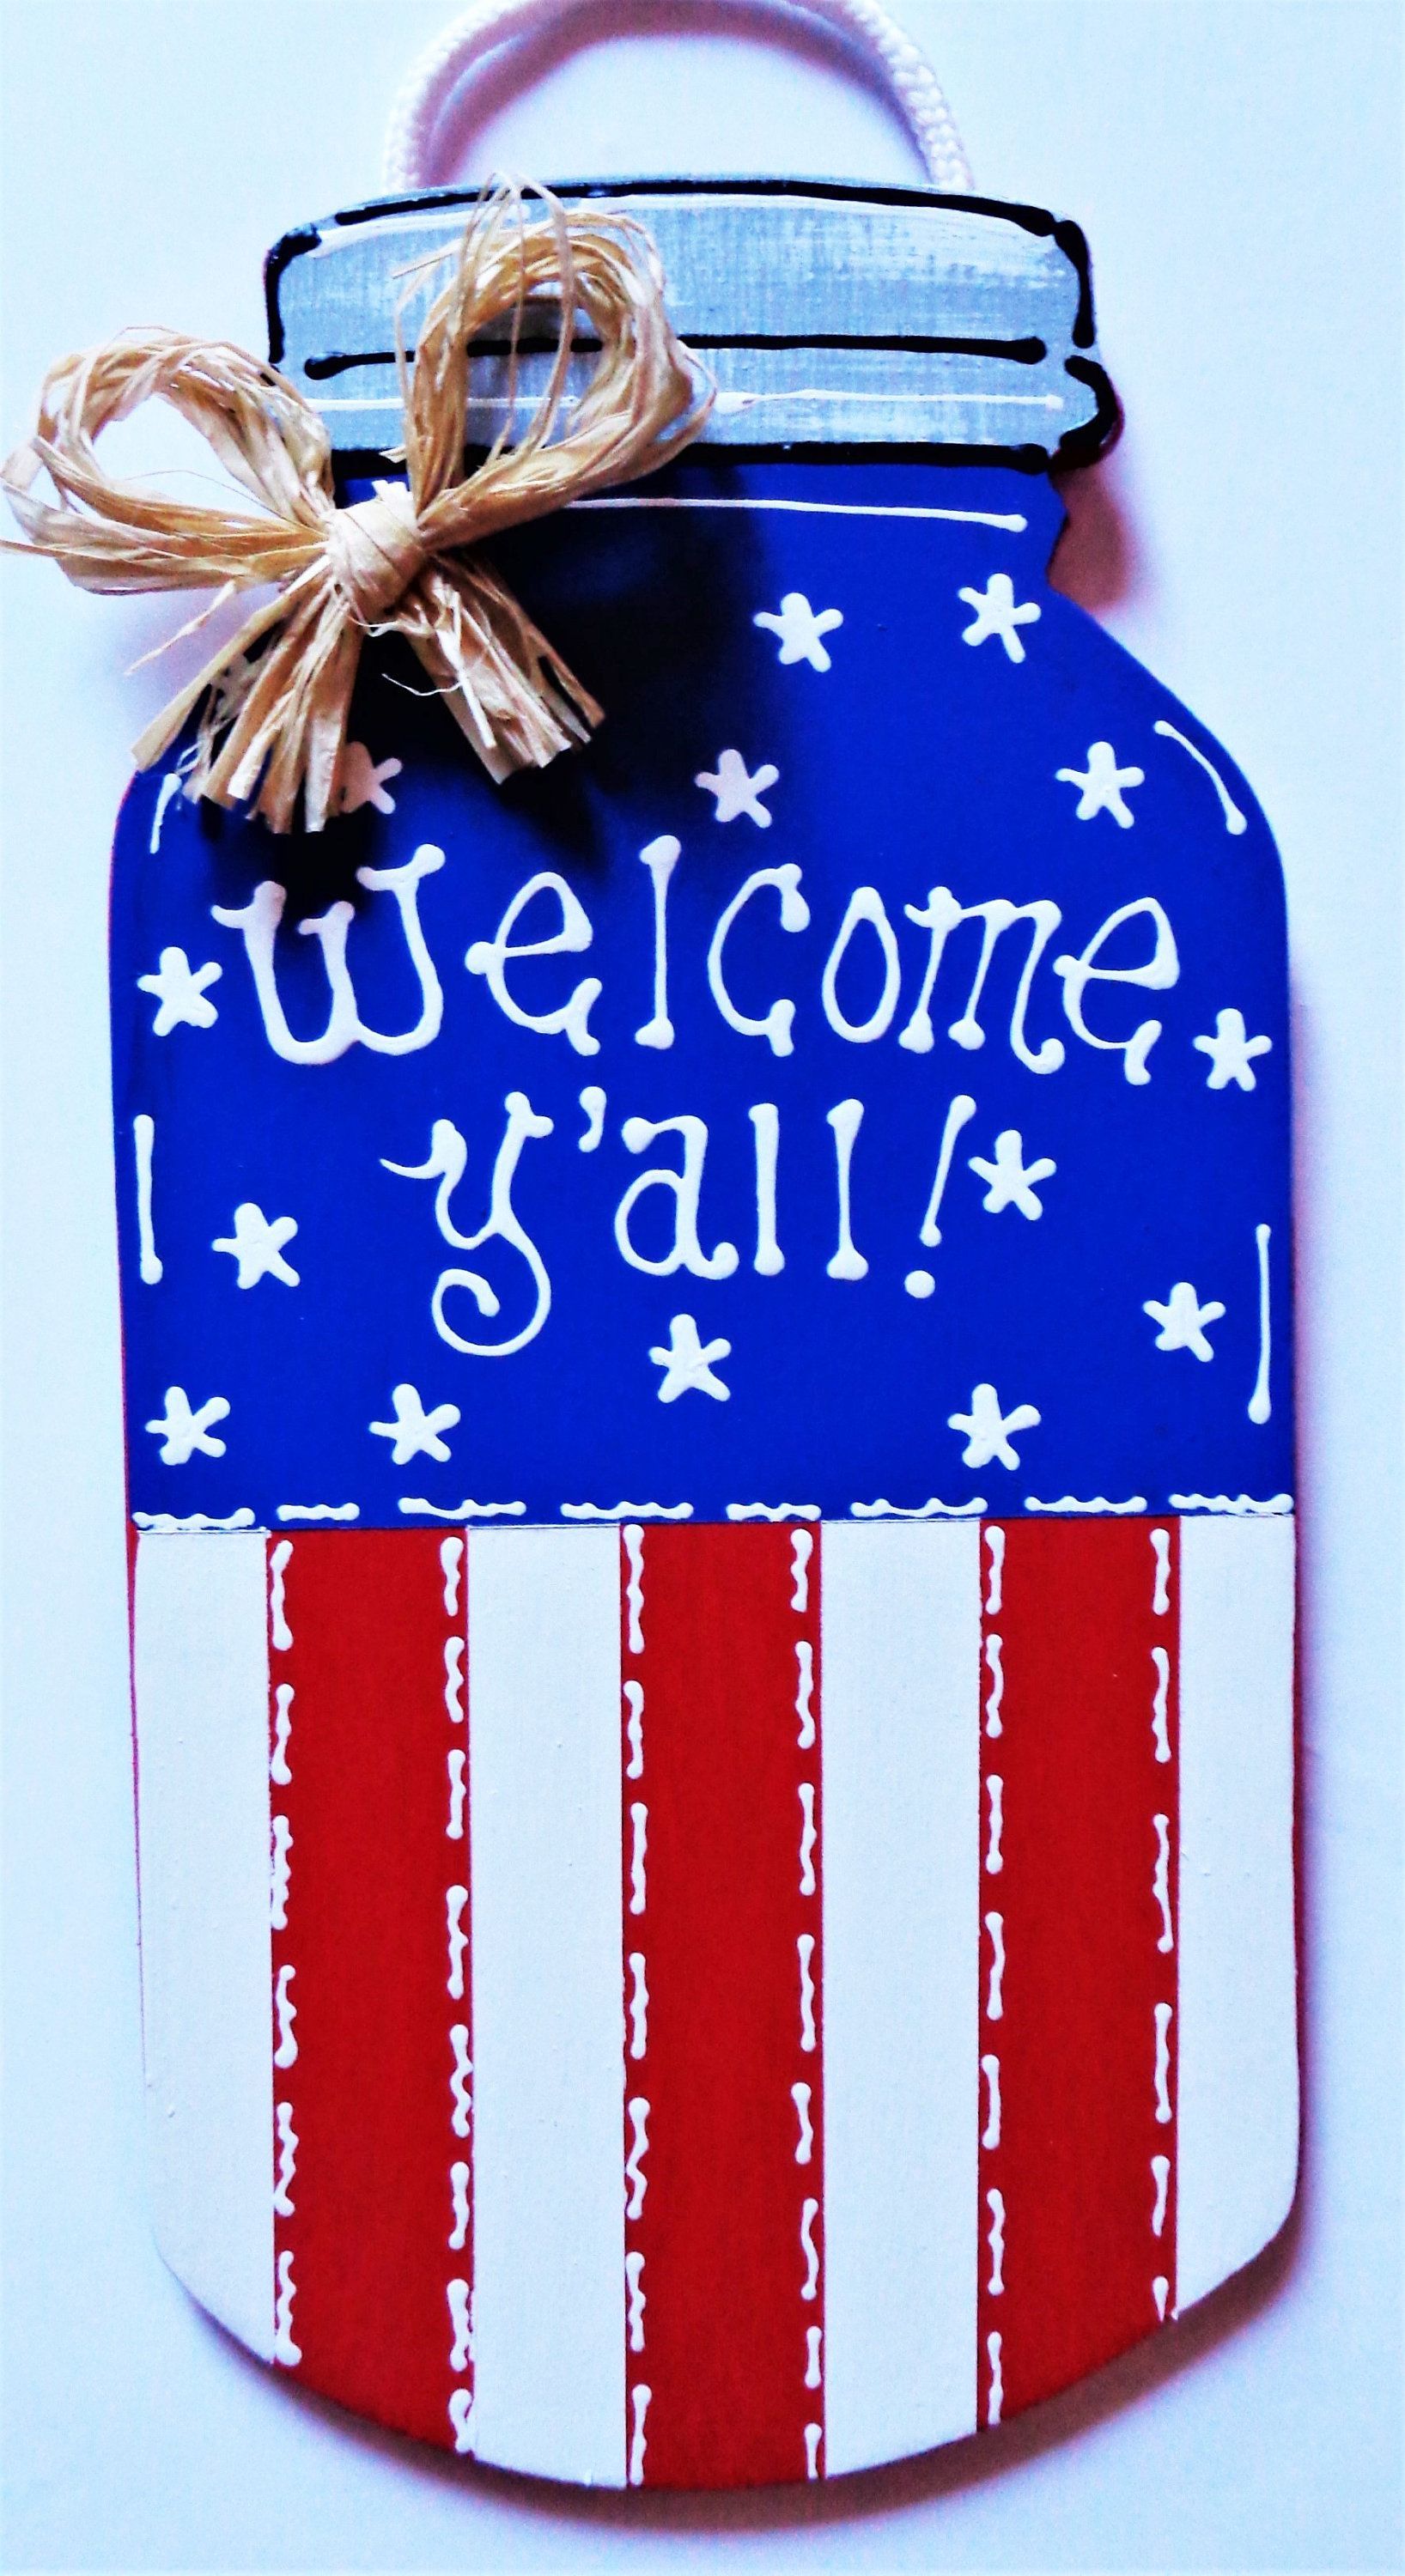 AMERICANA MASON JAR Welcome Y'all Sign Hanging Door Plaque Porch Deck Pool Family Wall Home Handcrafted Hand Painted Wreath Embellishment -   24 mason jar burlap
 ideas